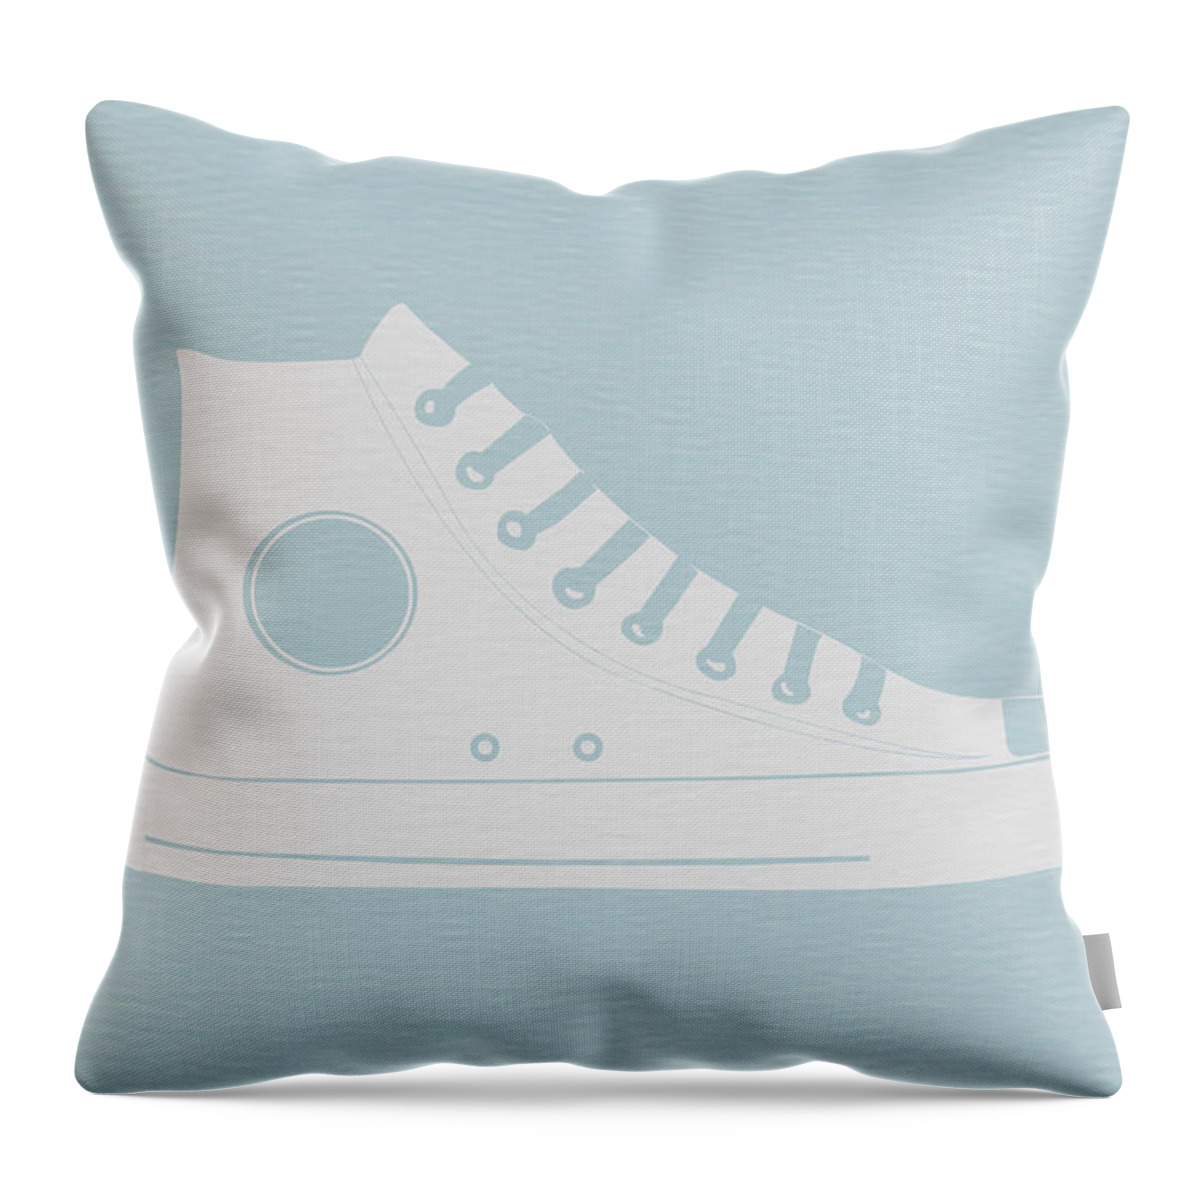  Throw Pillow featuring the photograph Converse Shoe by Naxart Studio